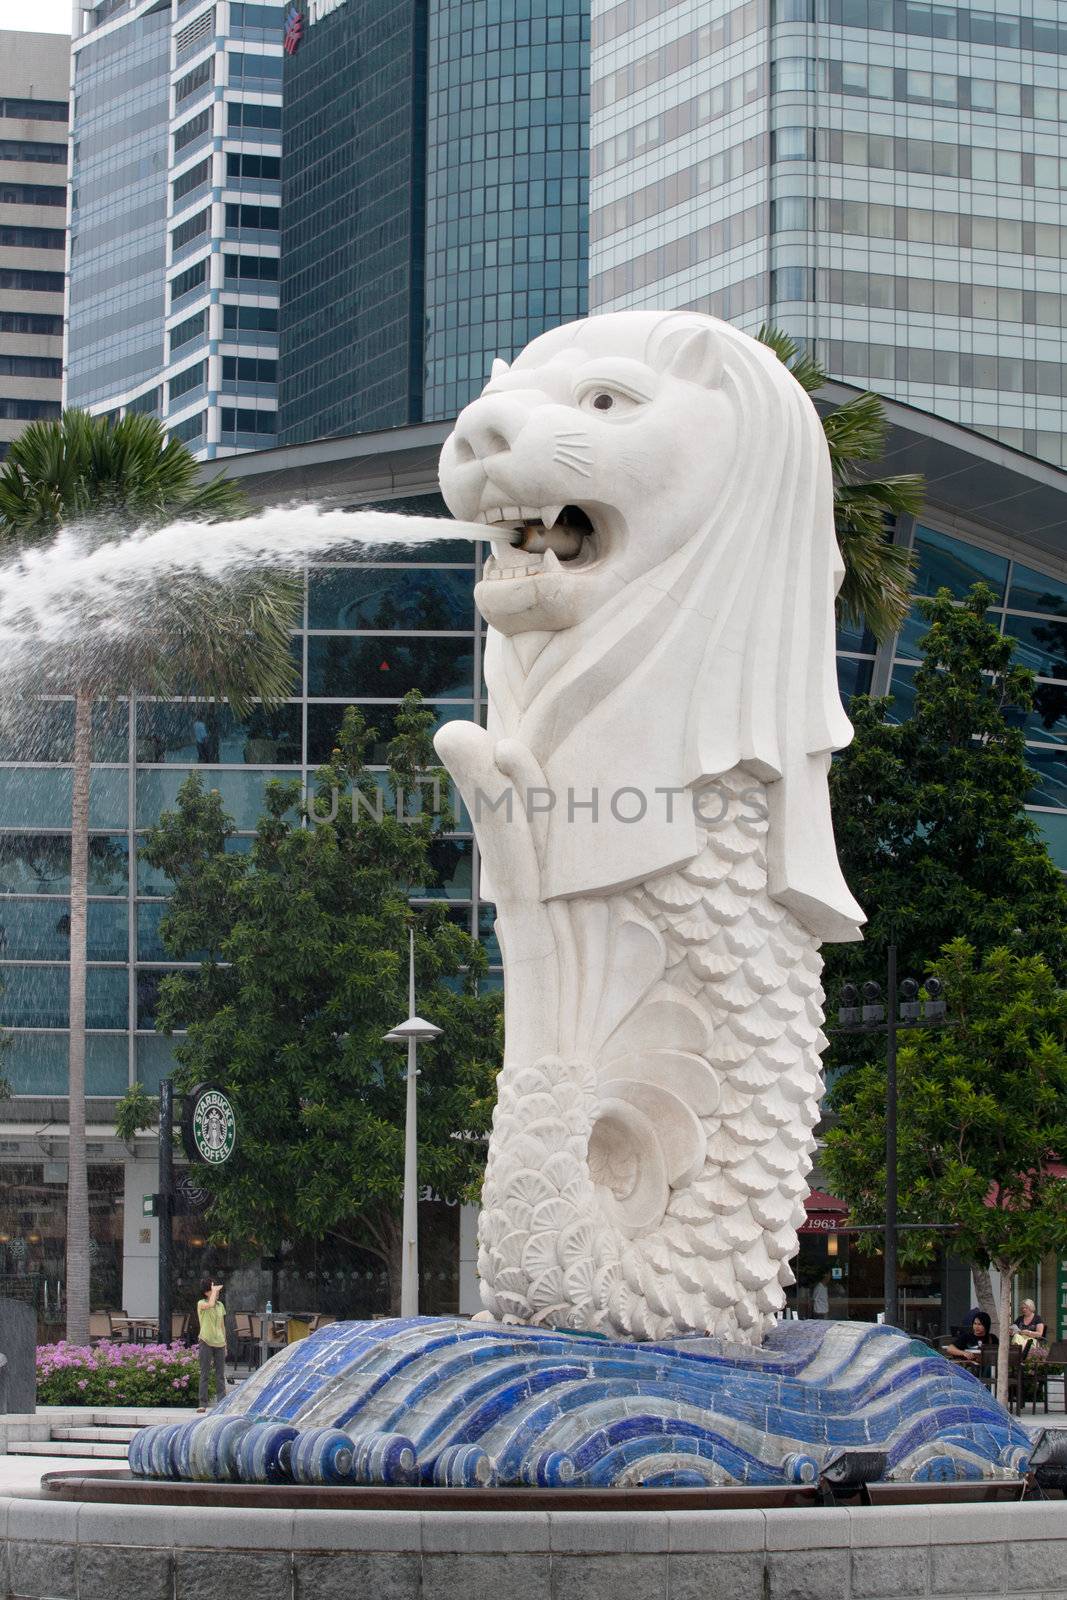 SINGAPORE - JUNE 27: Original Merlion statue fountain in Merlion Park, Singapore, June 27, 2009. This sculpture fountain is one of most well known icons of Singapore and is most important symbol, trademark of country.